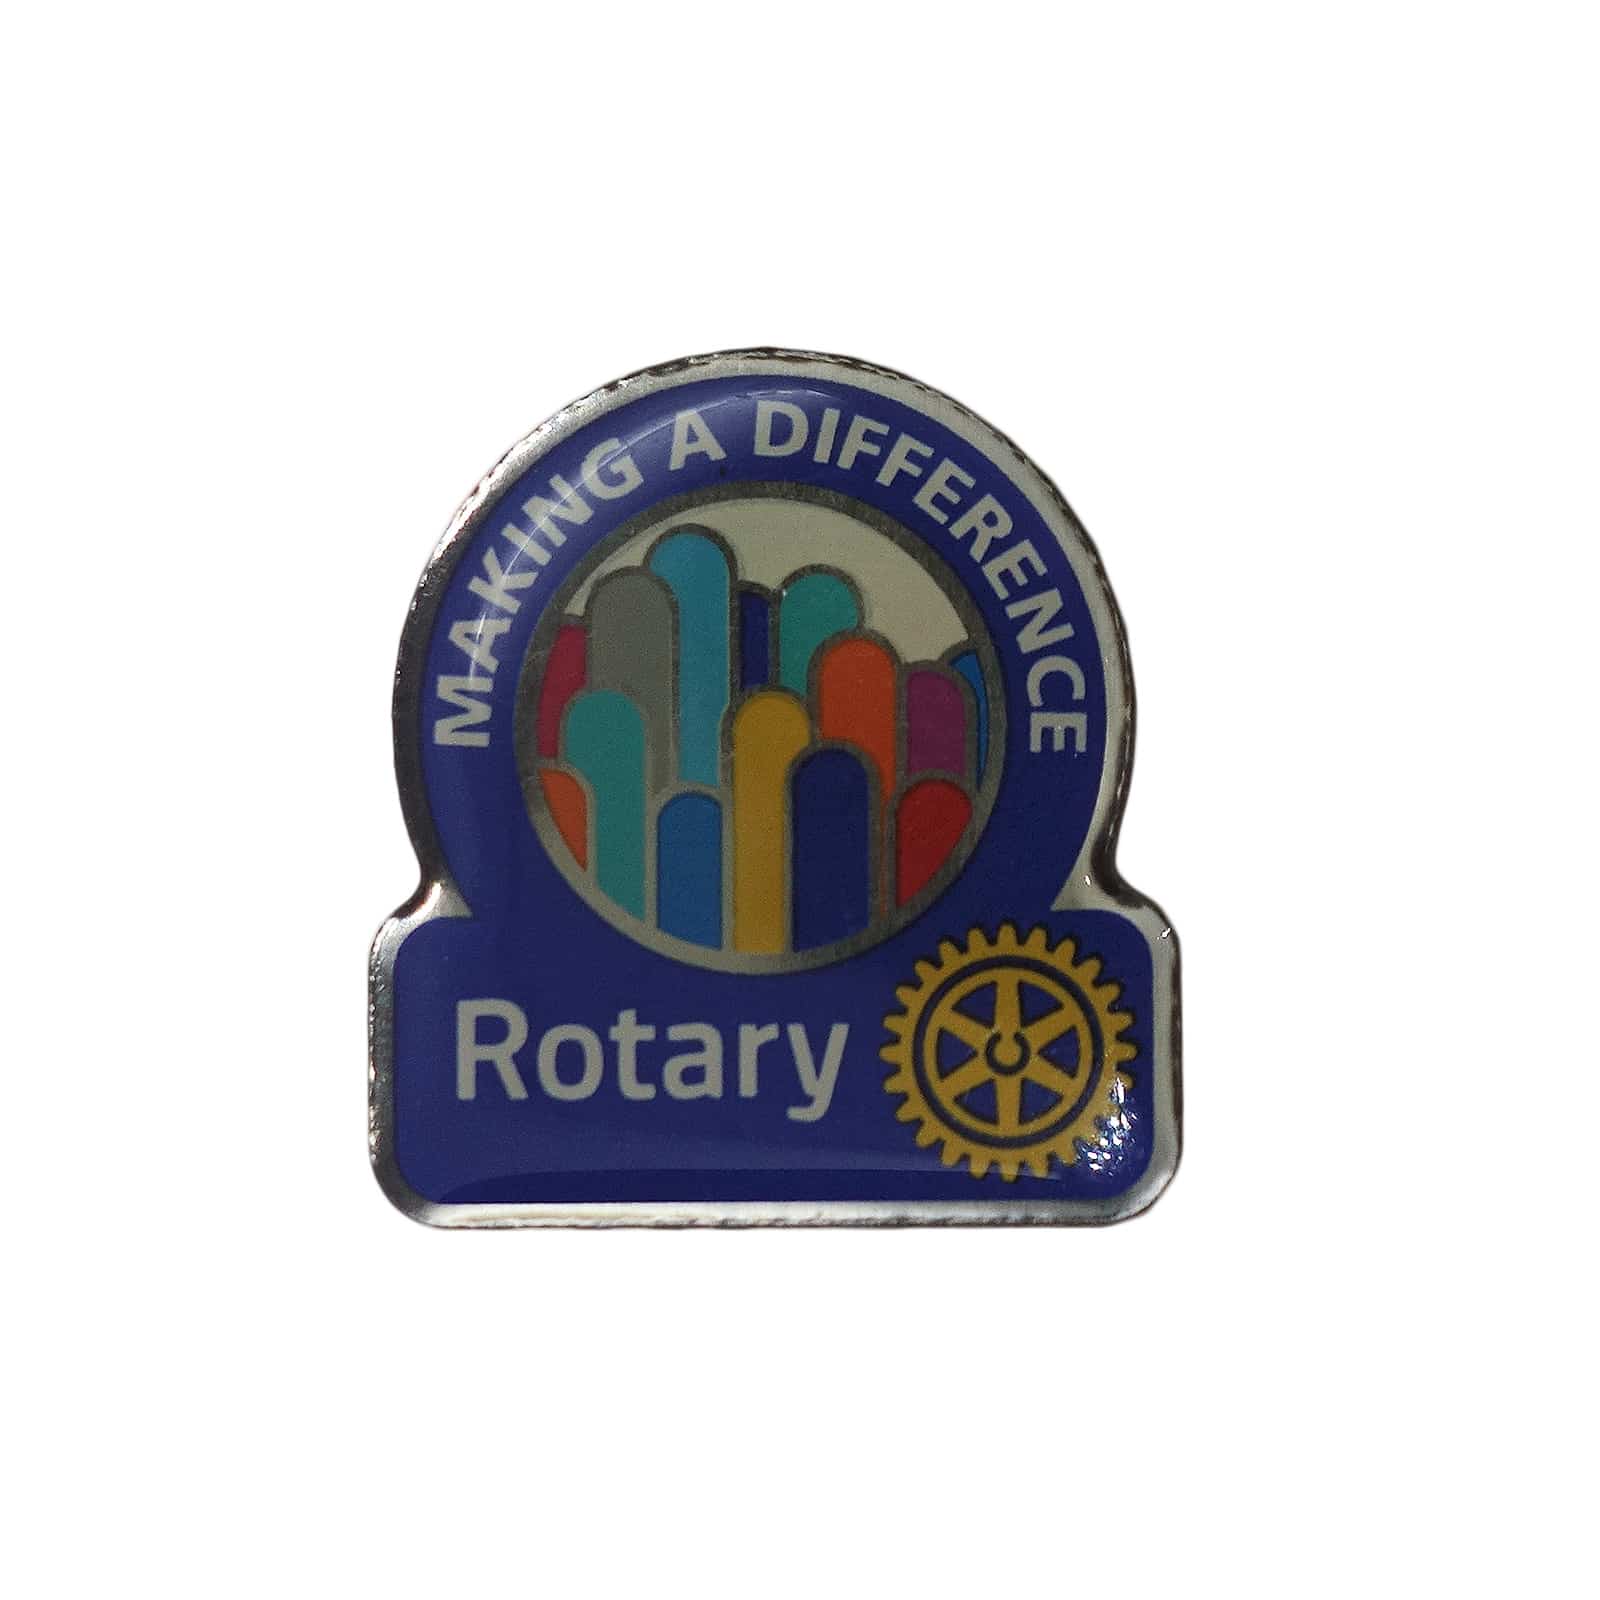 ROTARY CLUB ピンズ MAKING A DIFFERENCE ロータリークラブ 留め具付き